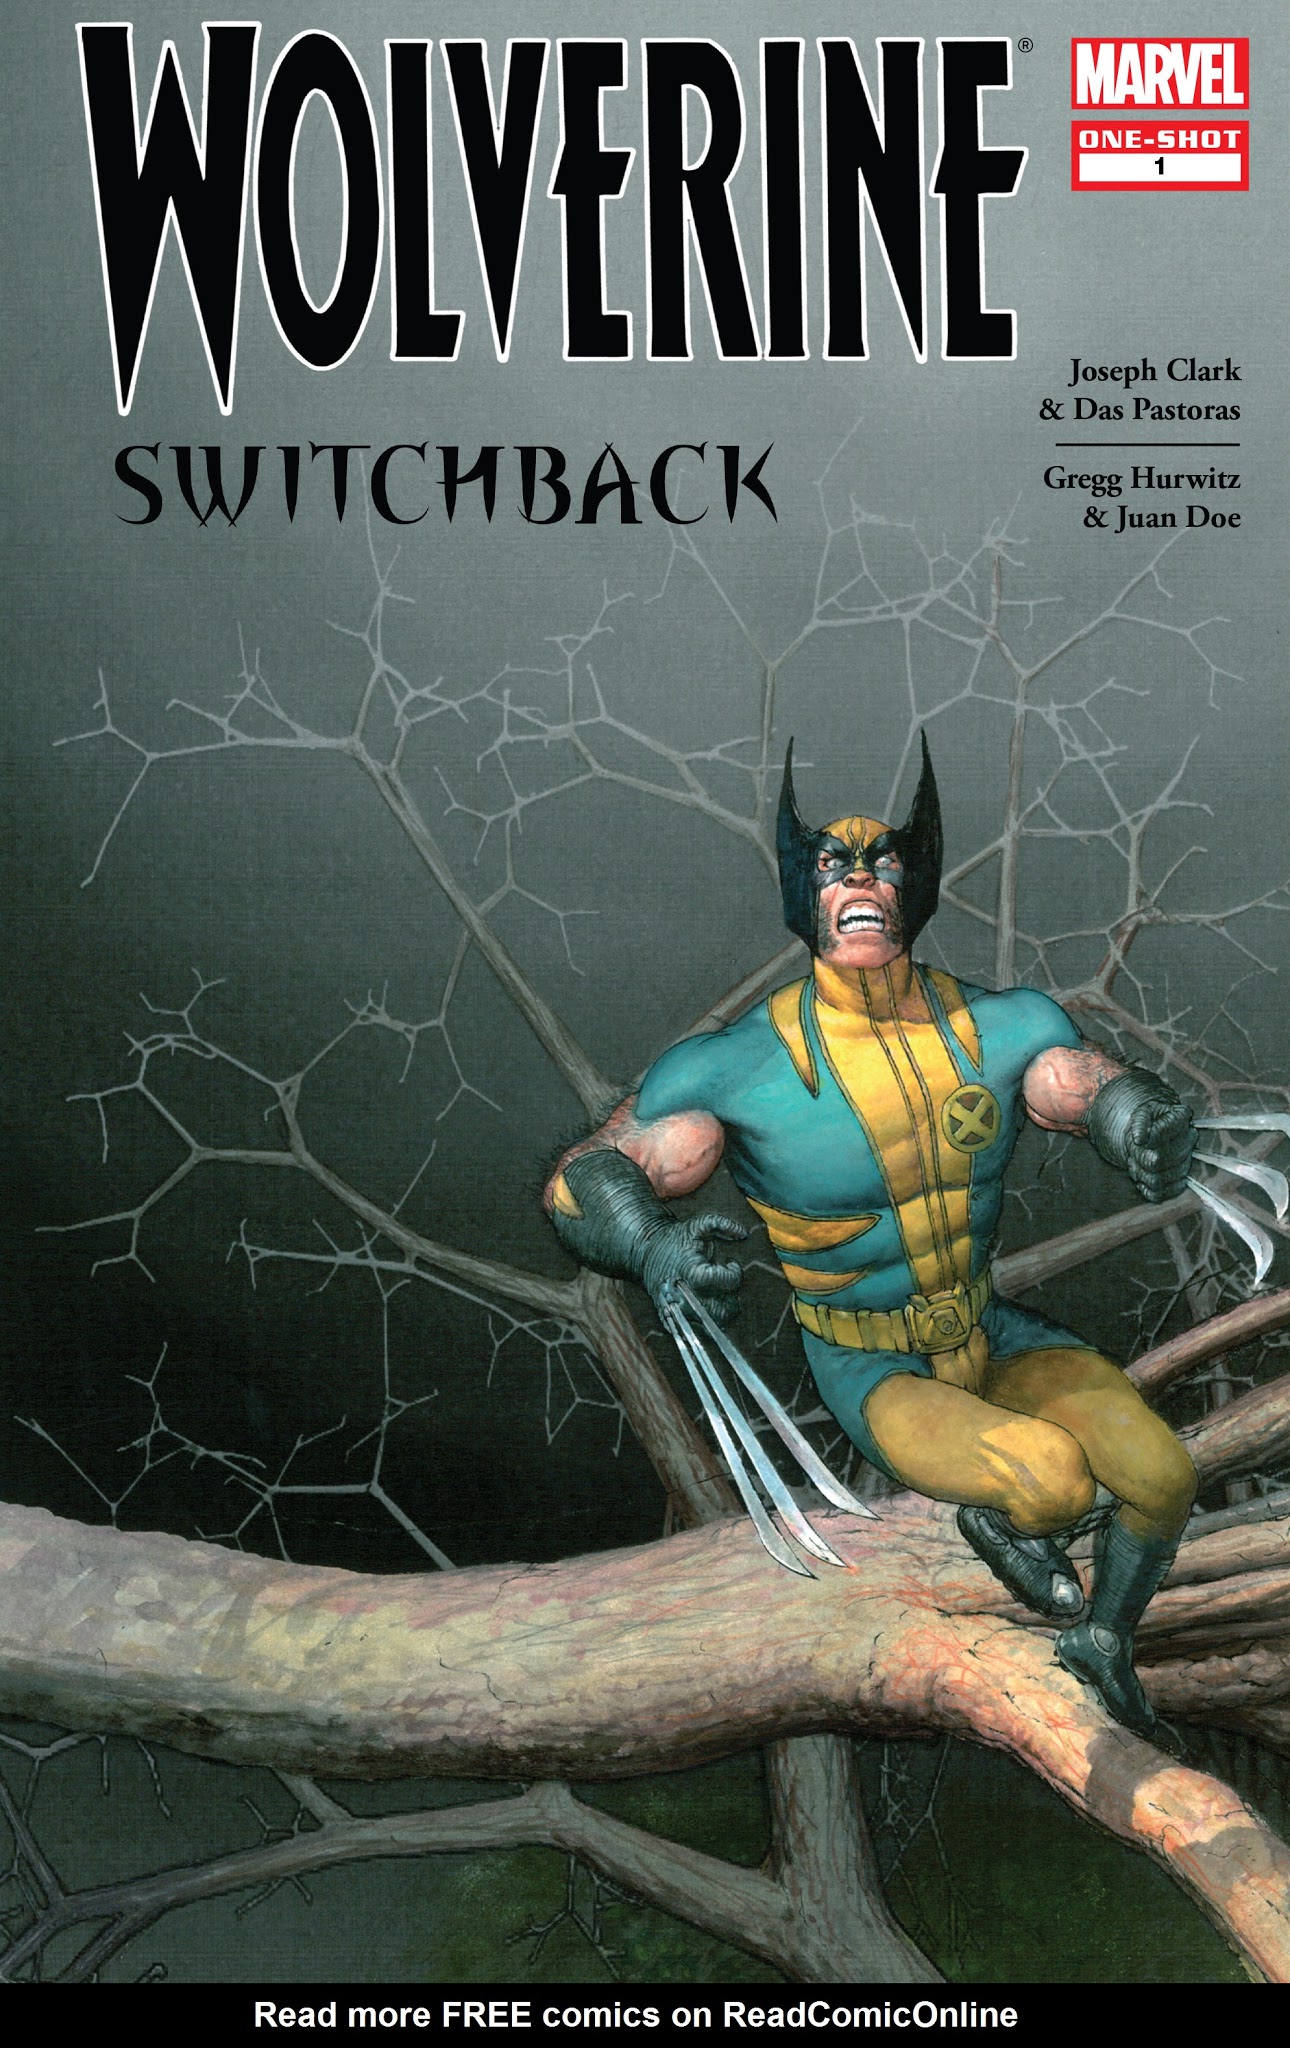 Read online Wolverine: Switchback comic -  Issue # Full - 1